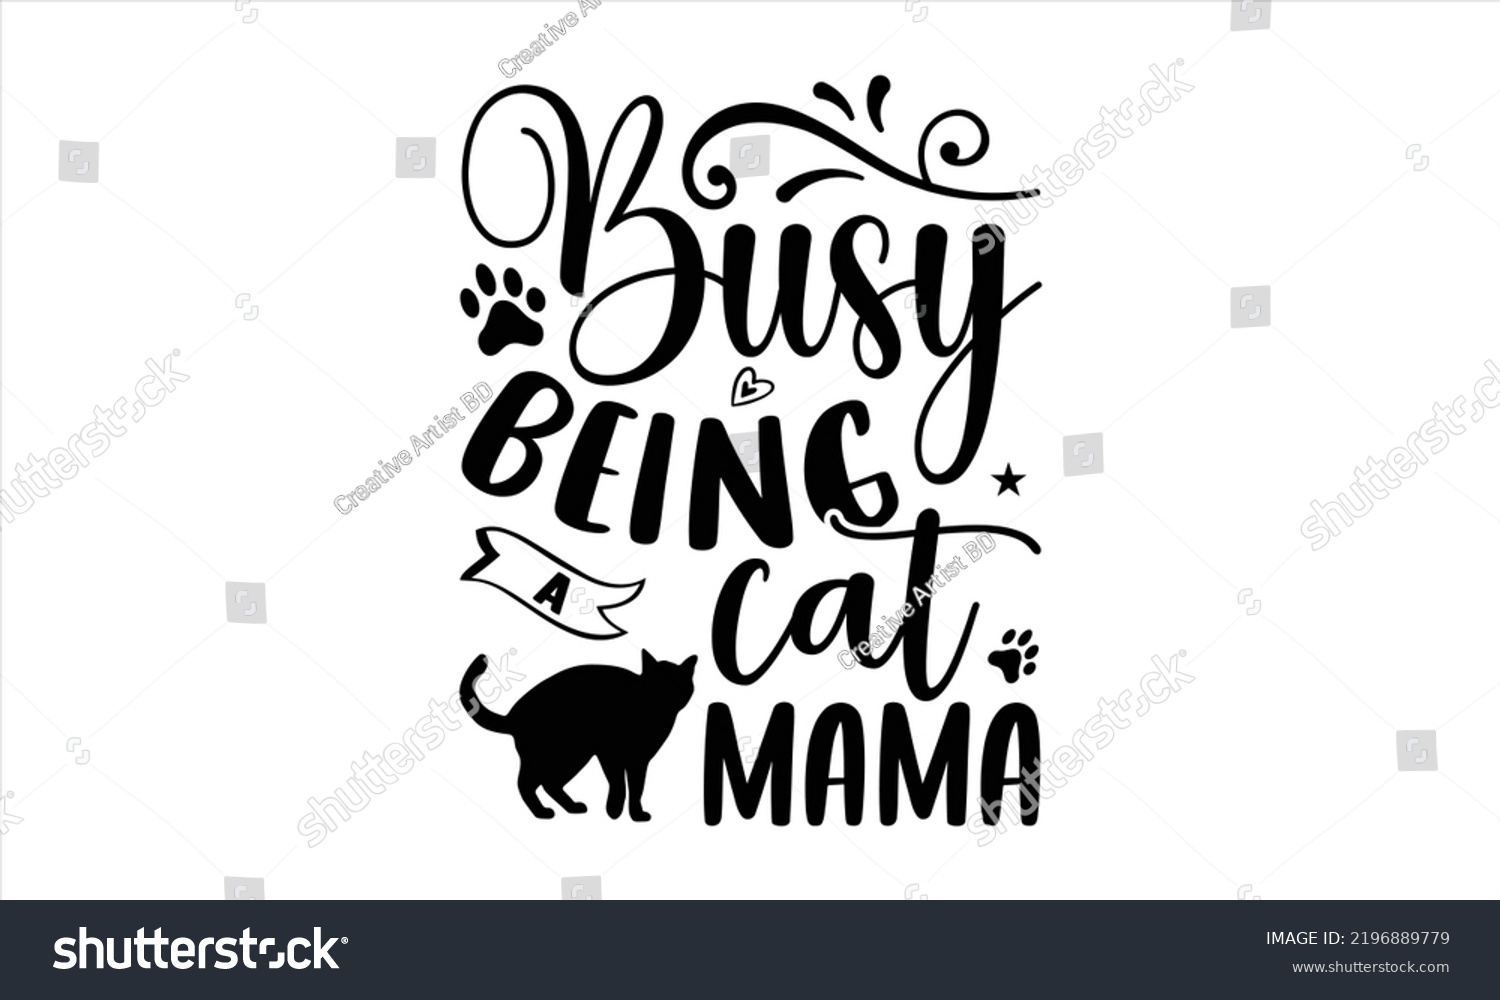 SVG of Busy Being A Cat Mama - Cat Mom T shirt Design, Hand drawn vintage illustration with hand-lettering and decoration elements, Cut Files for Cricut Svg, Digital Download  svg